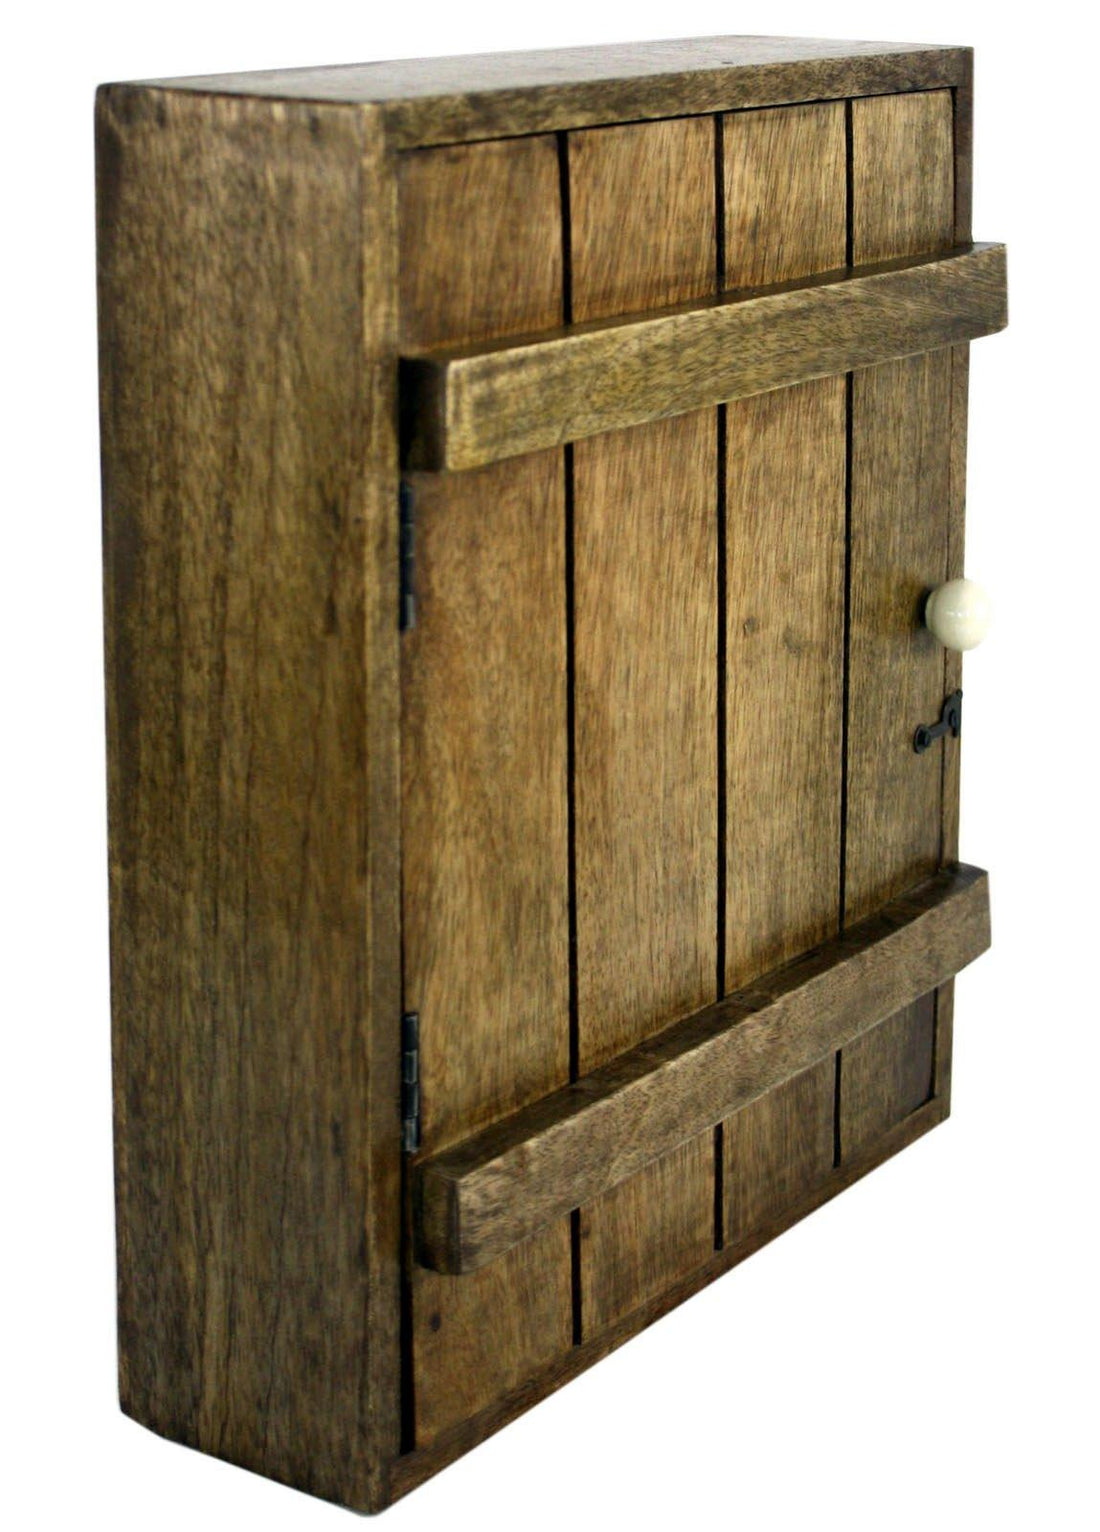 Solid Wood Wall Hanging Key Cabinet with 6 Hooks - £49.99 - Key Hooks & Boxes 